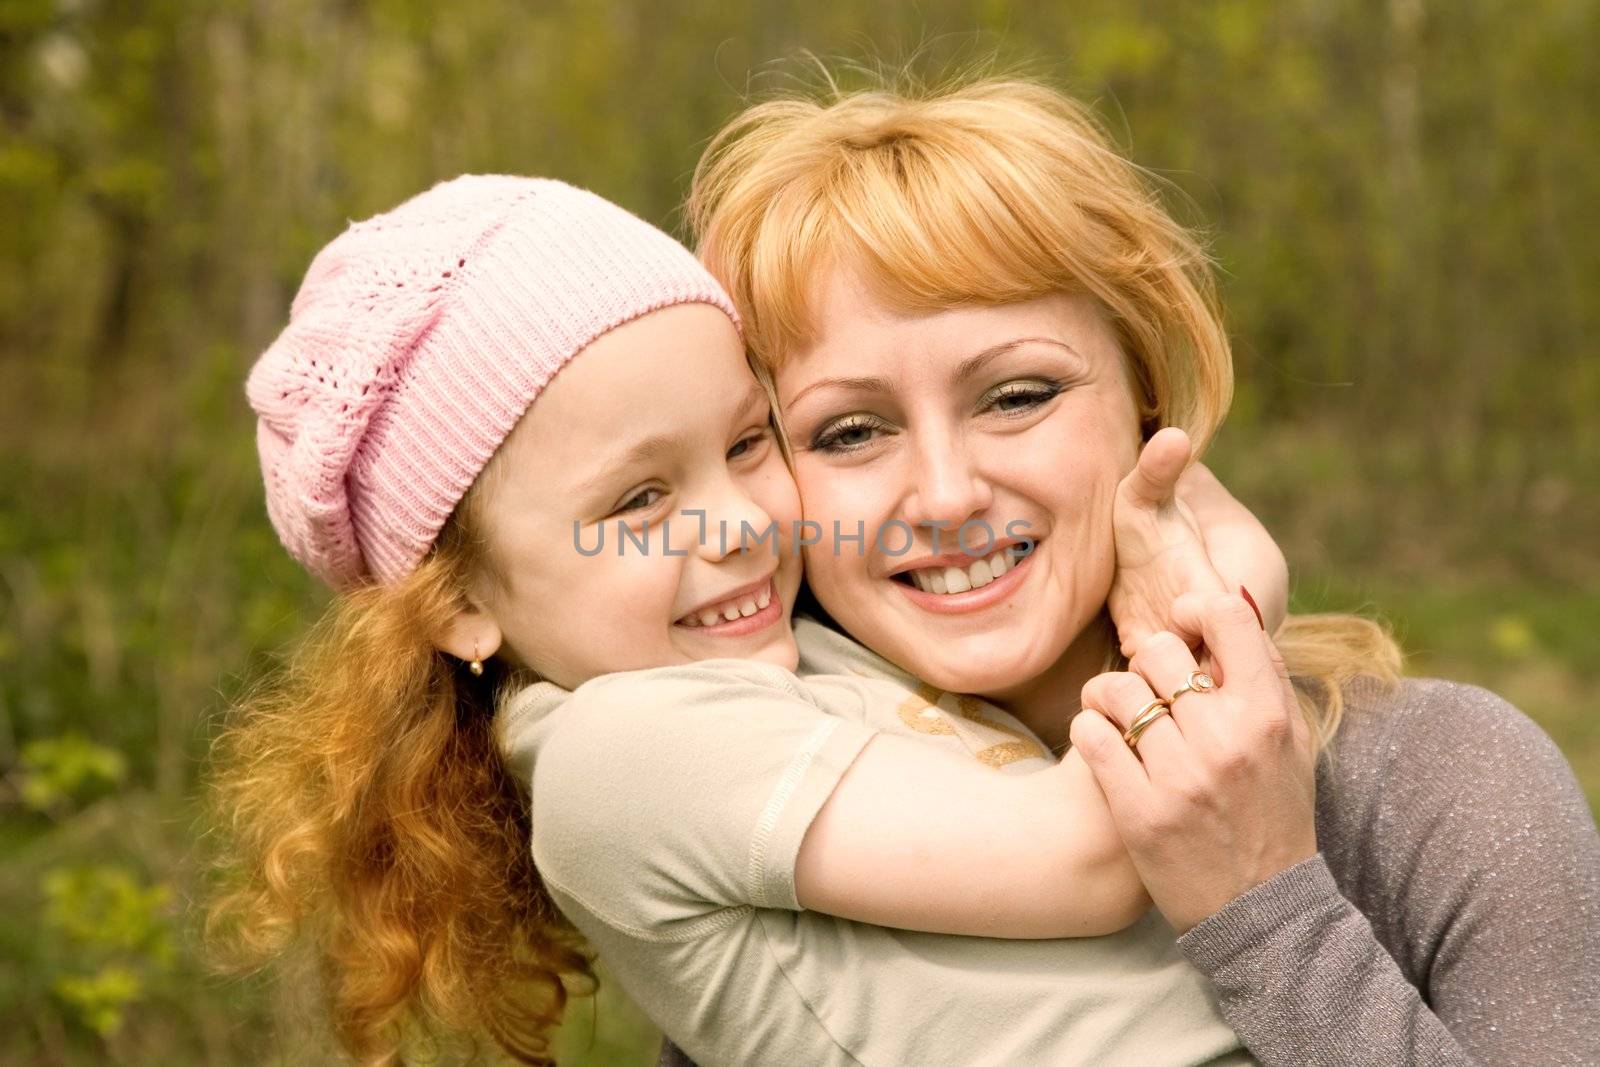 The beautiful little girl in a pink cap embraces mum with light hair
